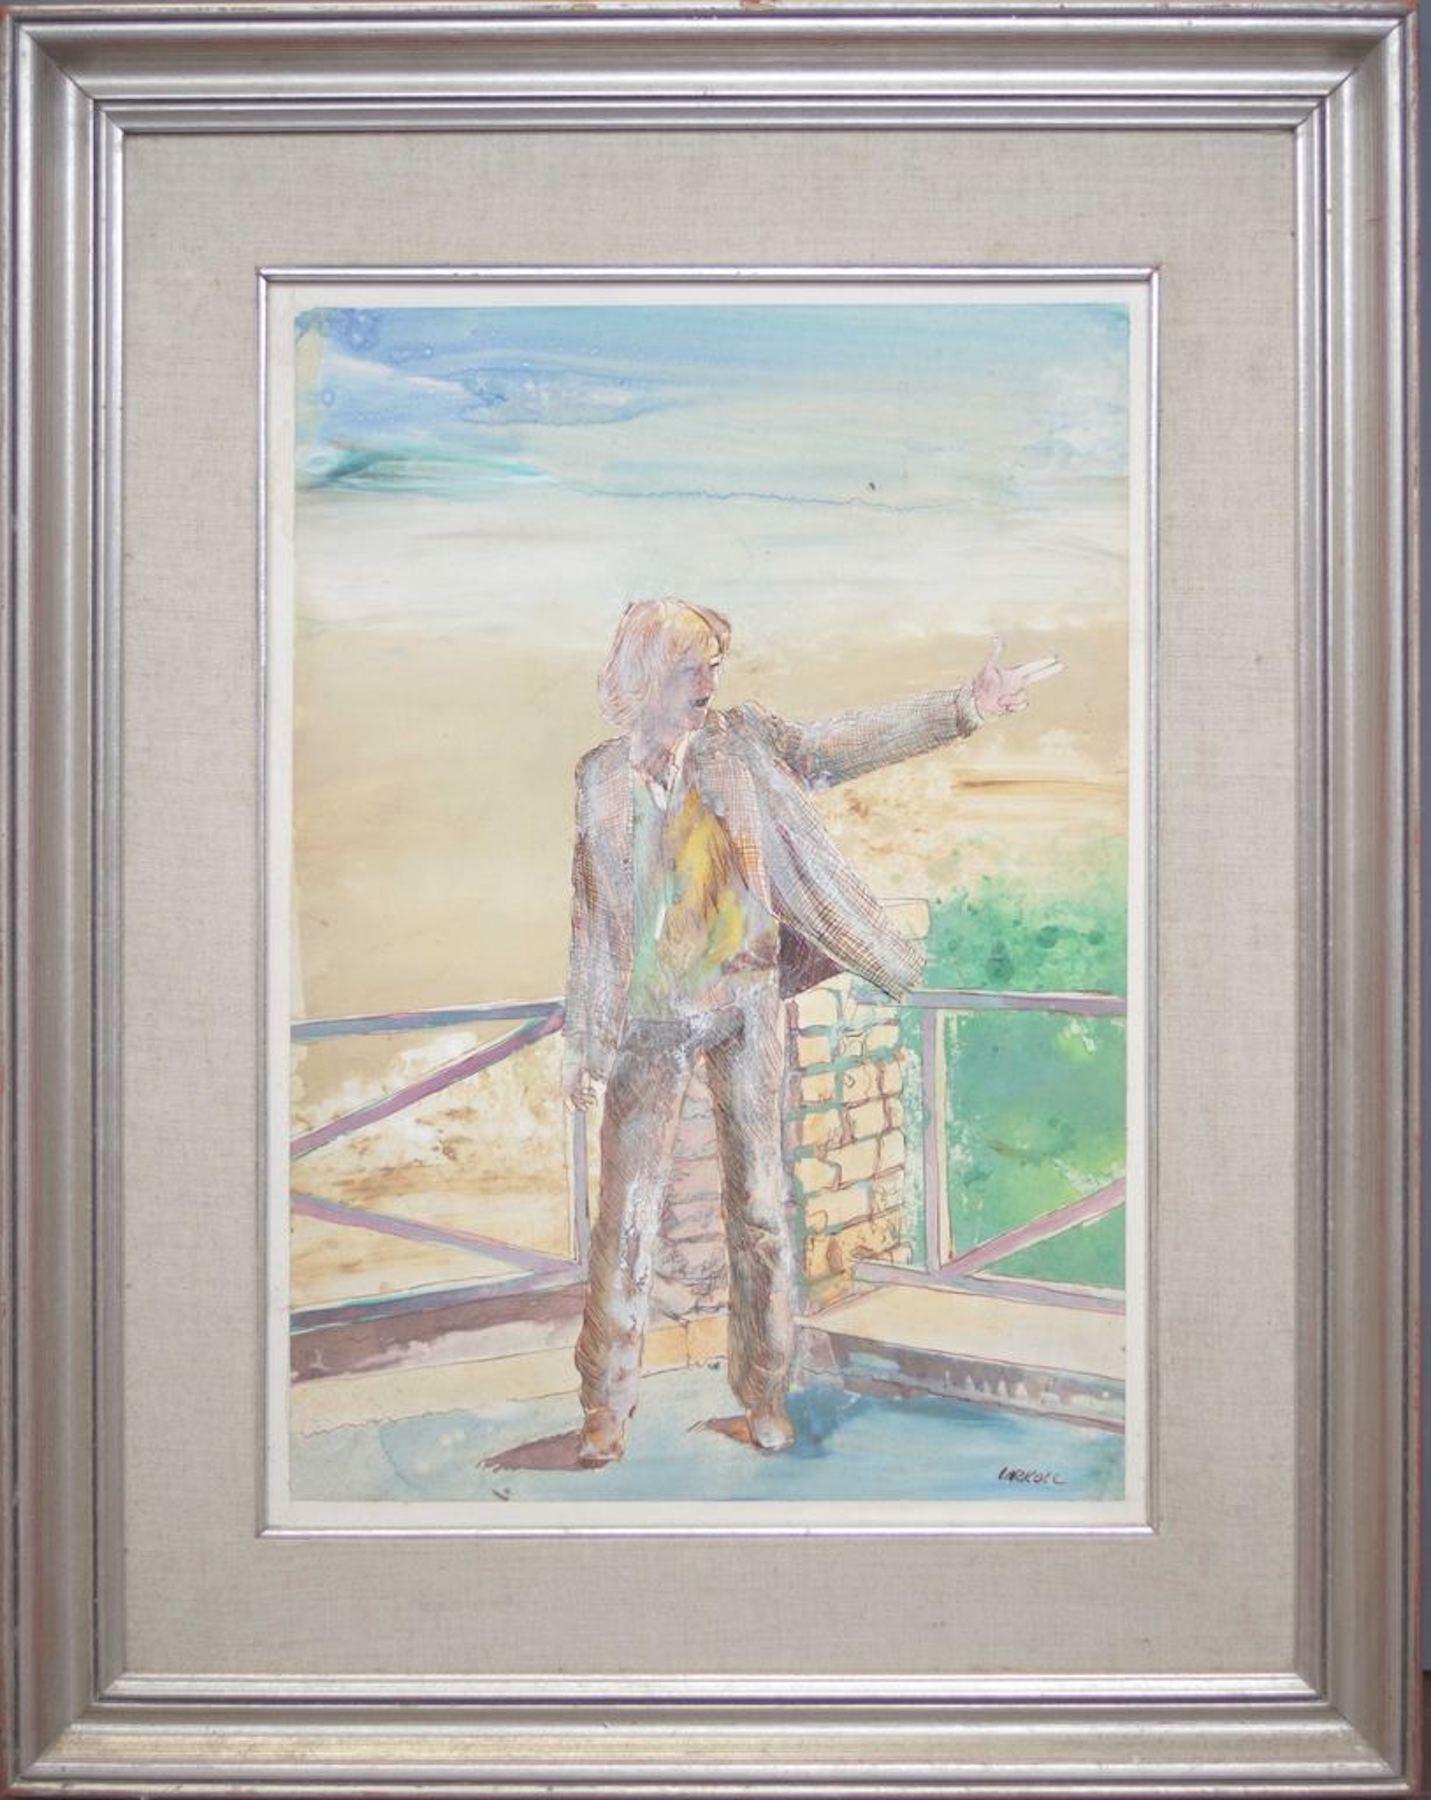 Acrylic painting by Robert Carroll, realized in 1969 ca.
Very good condition.
Robert Carroll is an american artist born in 1934 in Painesville, Ohio. He did study Arts at the Cleveland Institute of Arts where he graduated in 1957.
Since the end of